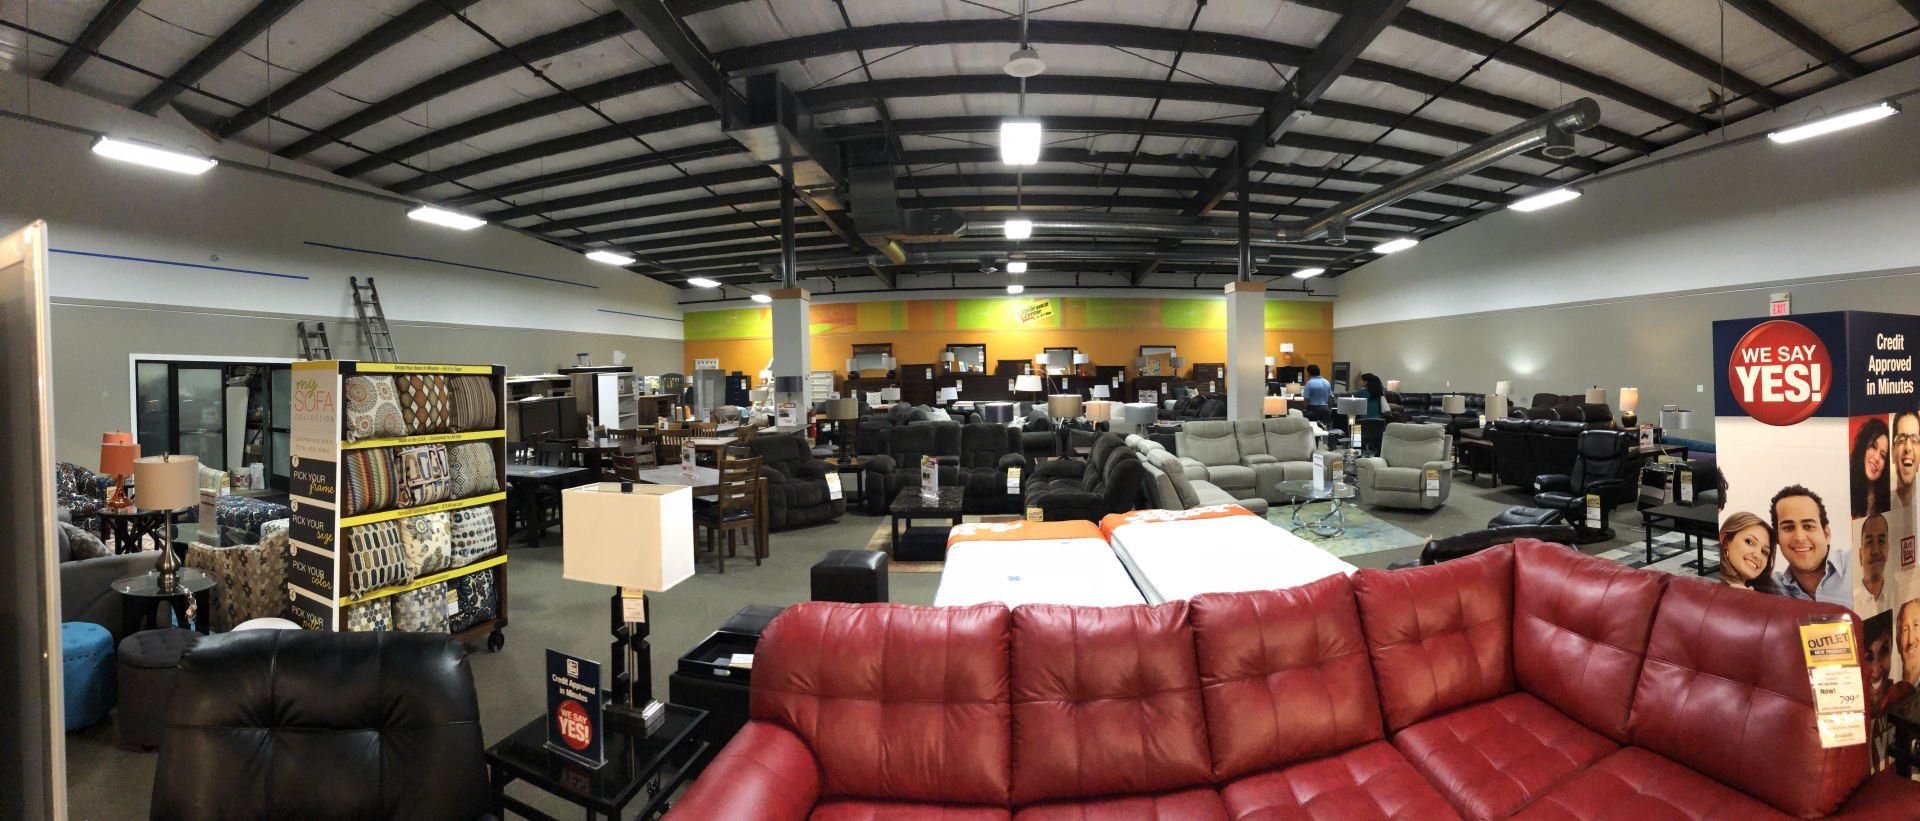 A Fresh New Look For Art Van Furniture In Rockford, IL